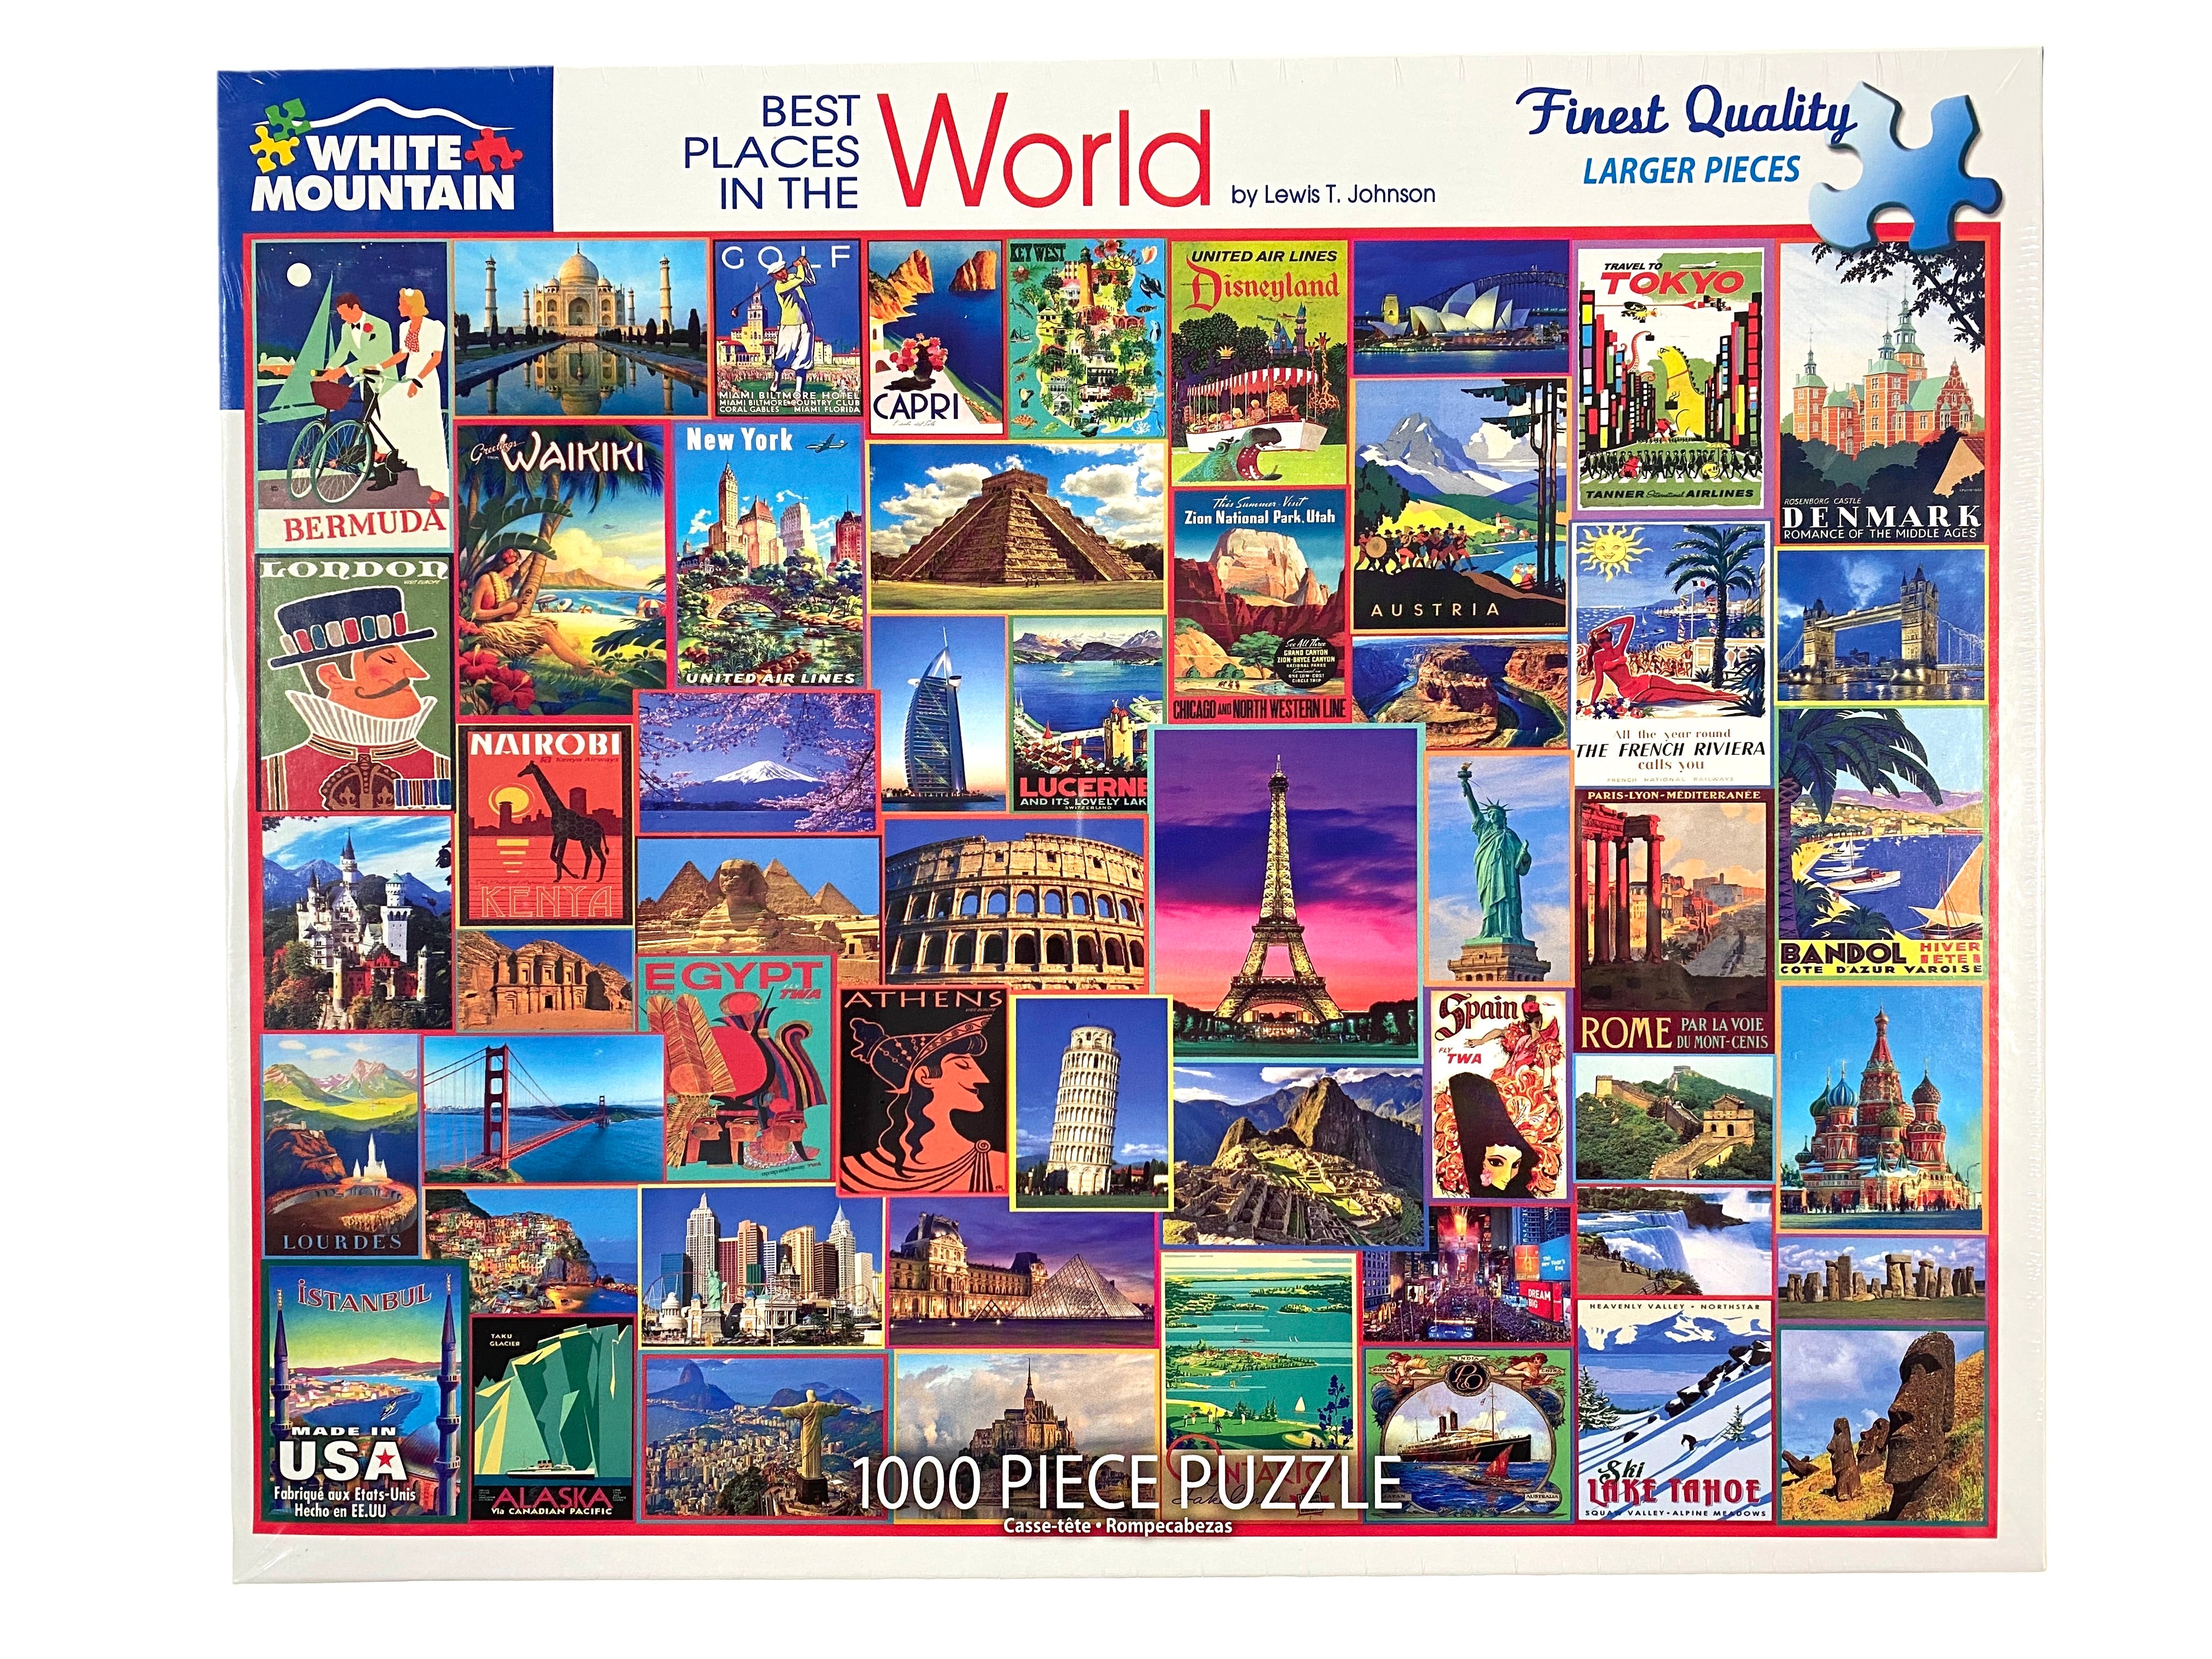 Best Places in the World 1000 piece puzzle    